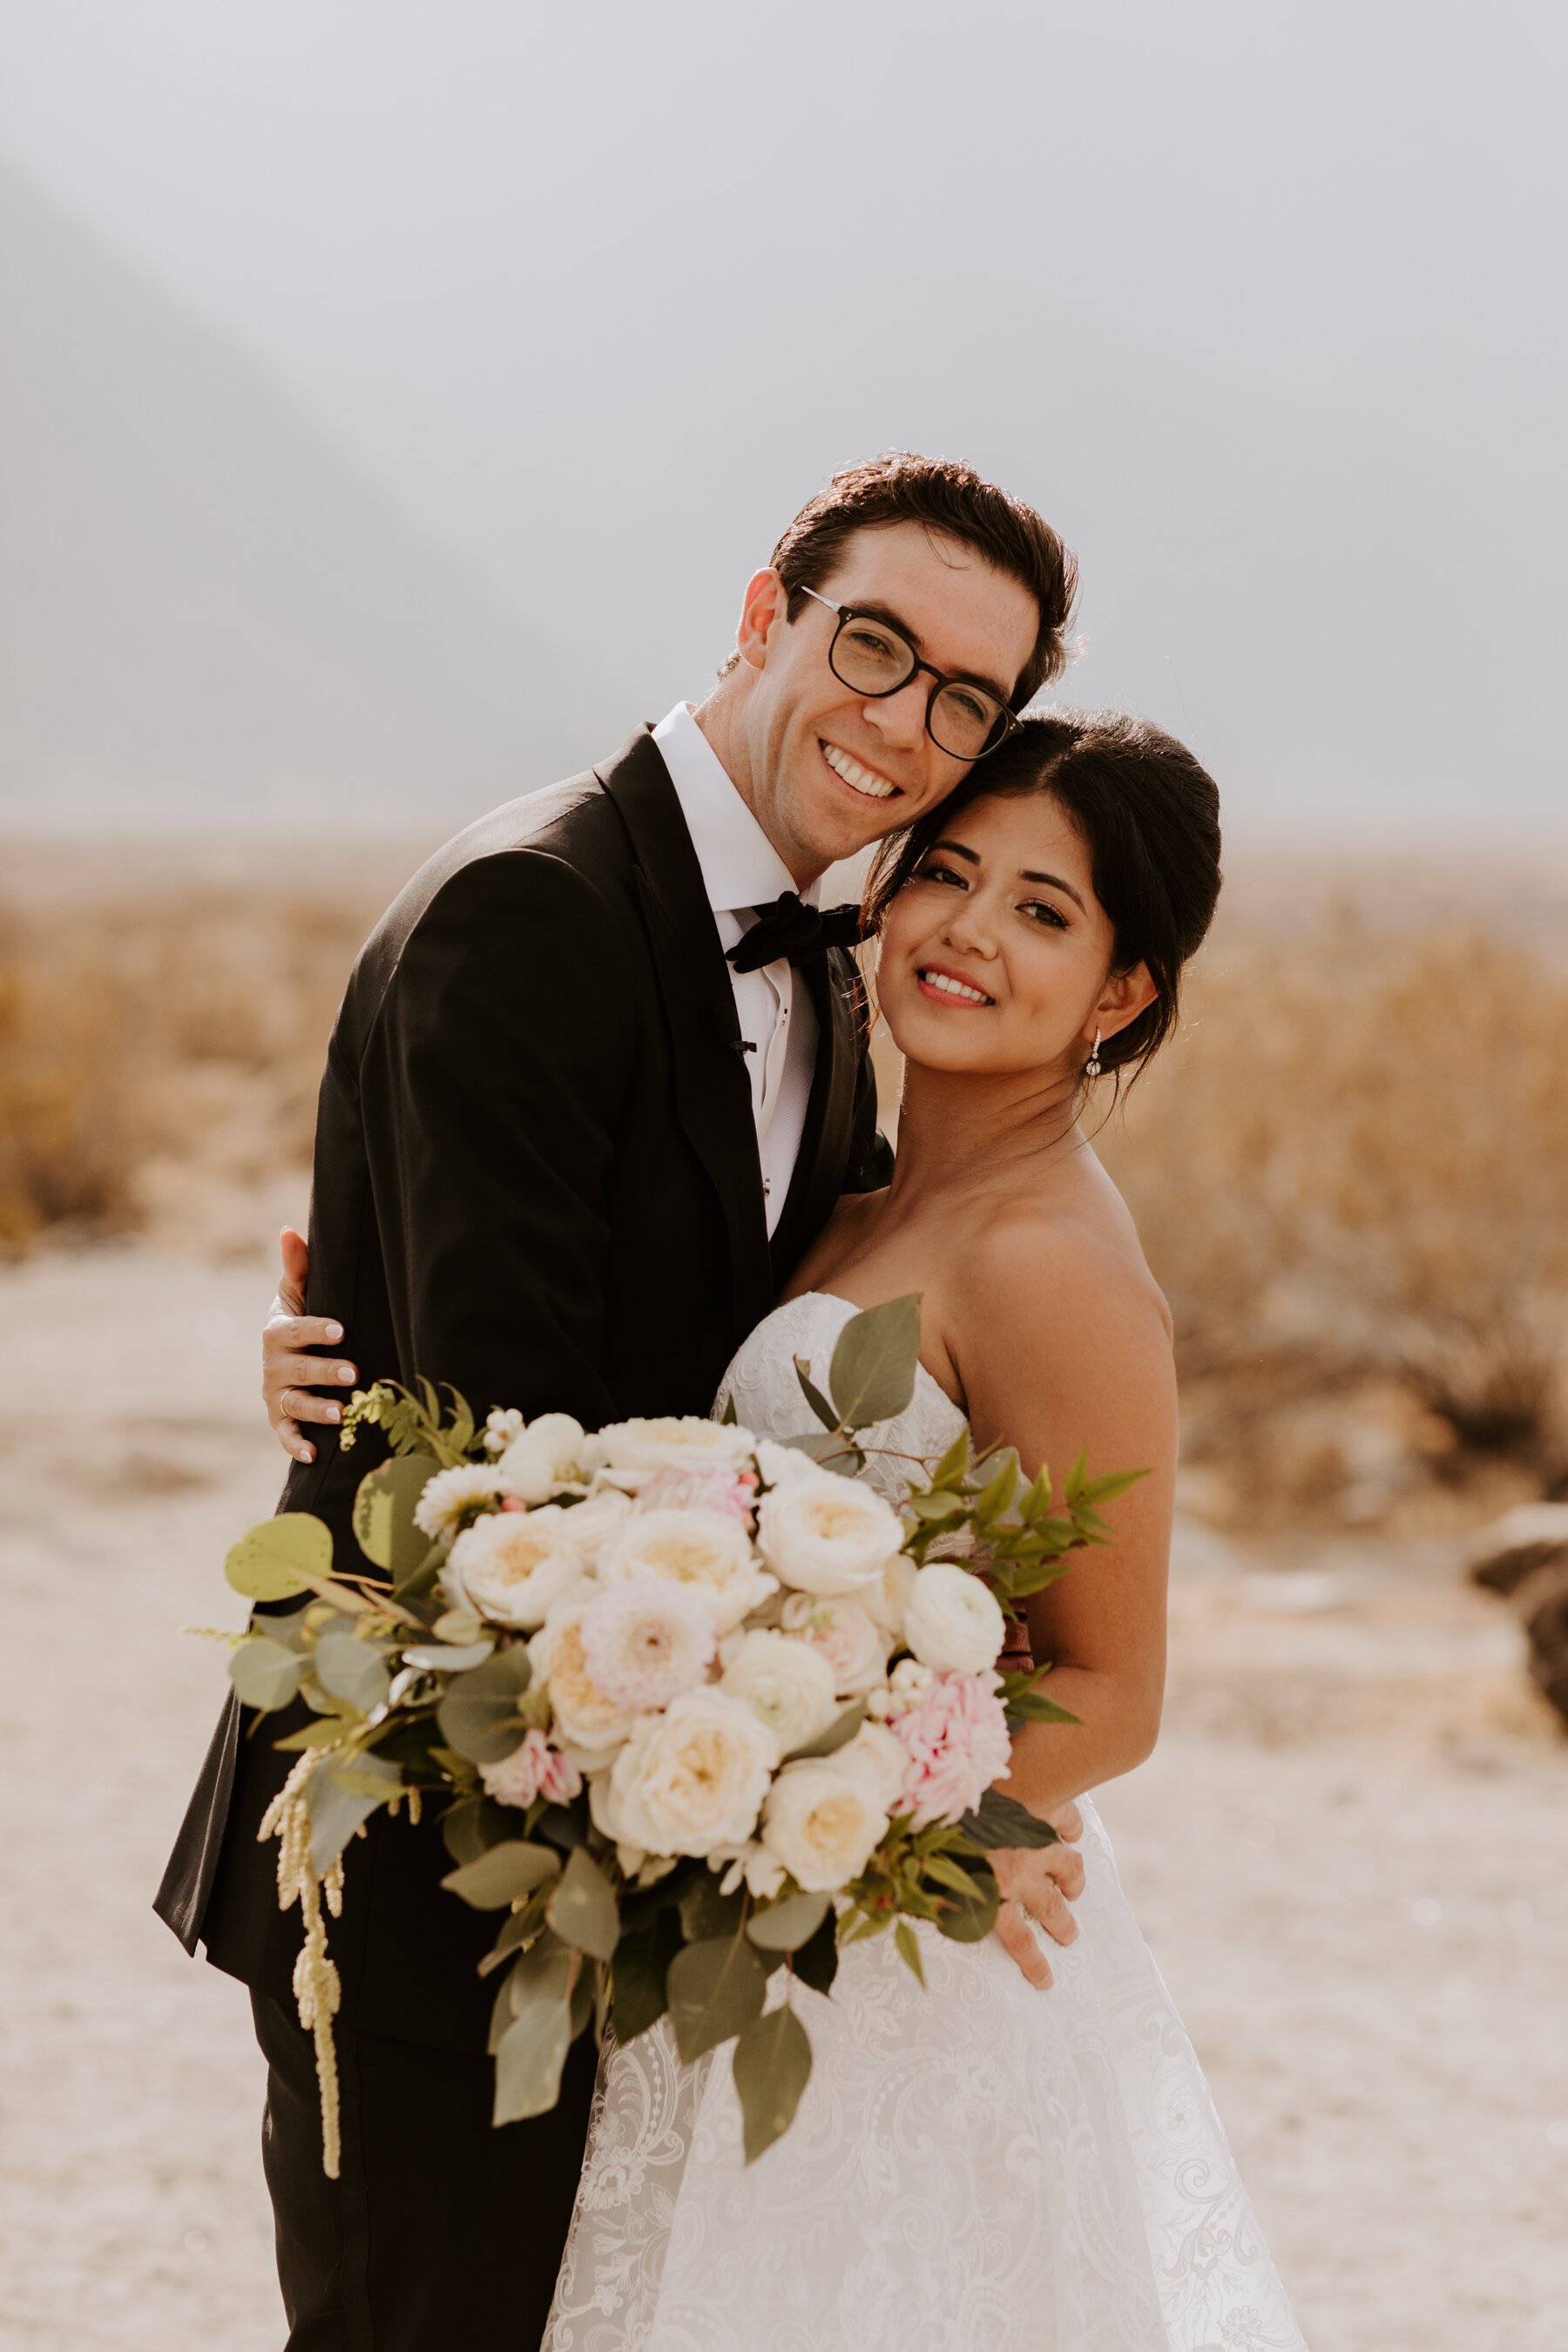 Bride and Groom close up portrait in Palm Springs, Palm Springs Wedding and Elopement Photographer, Photo by Tida Svy